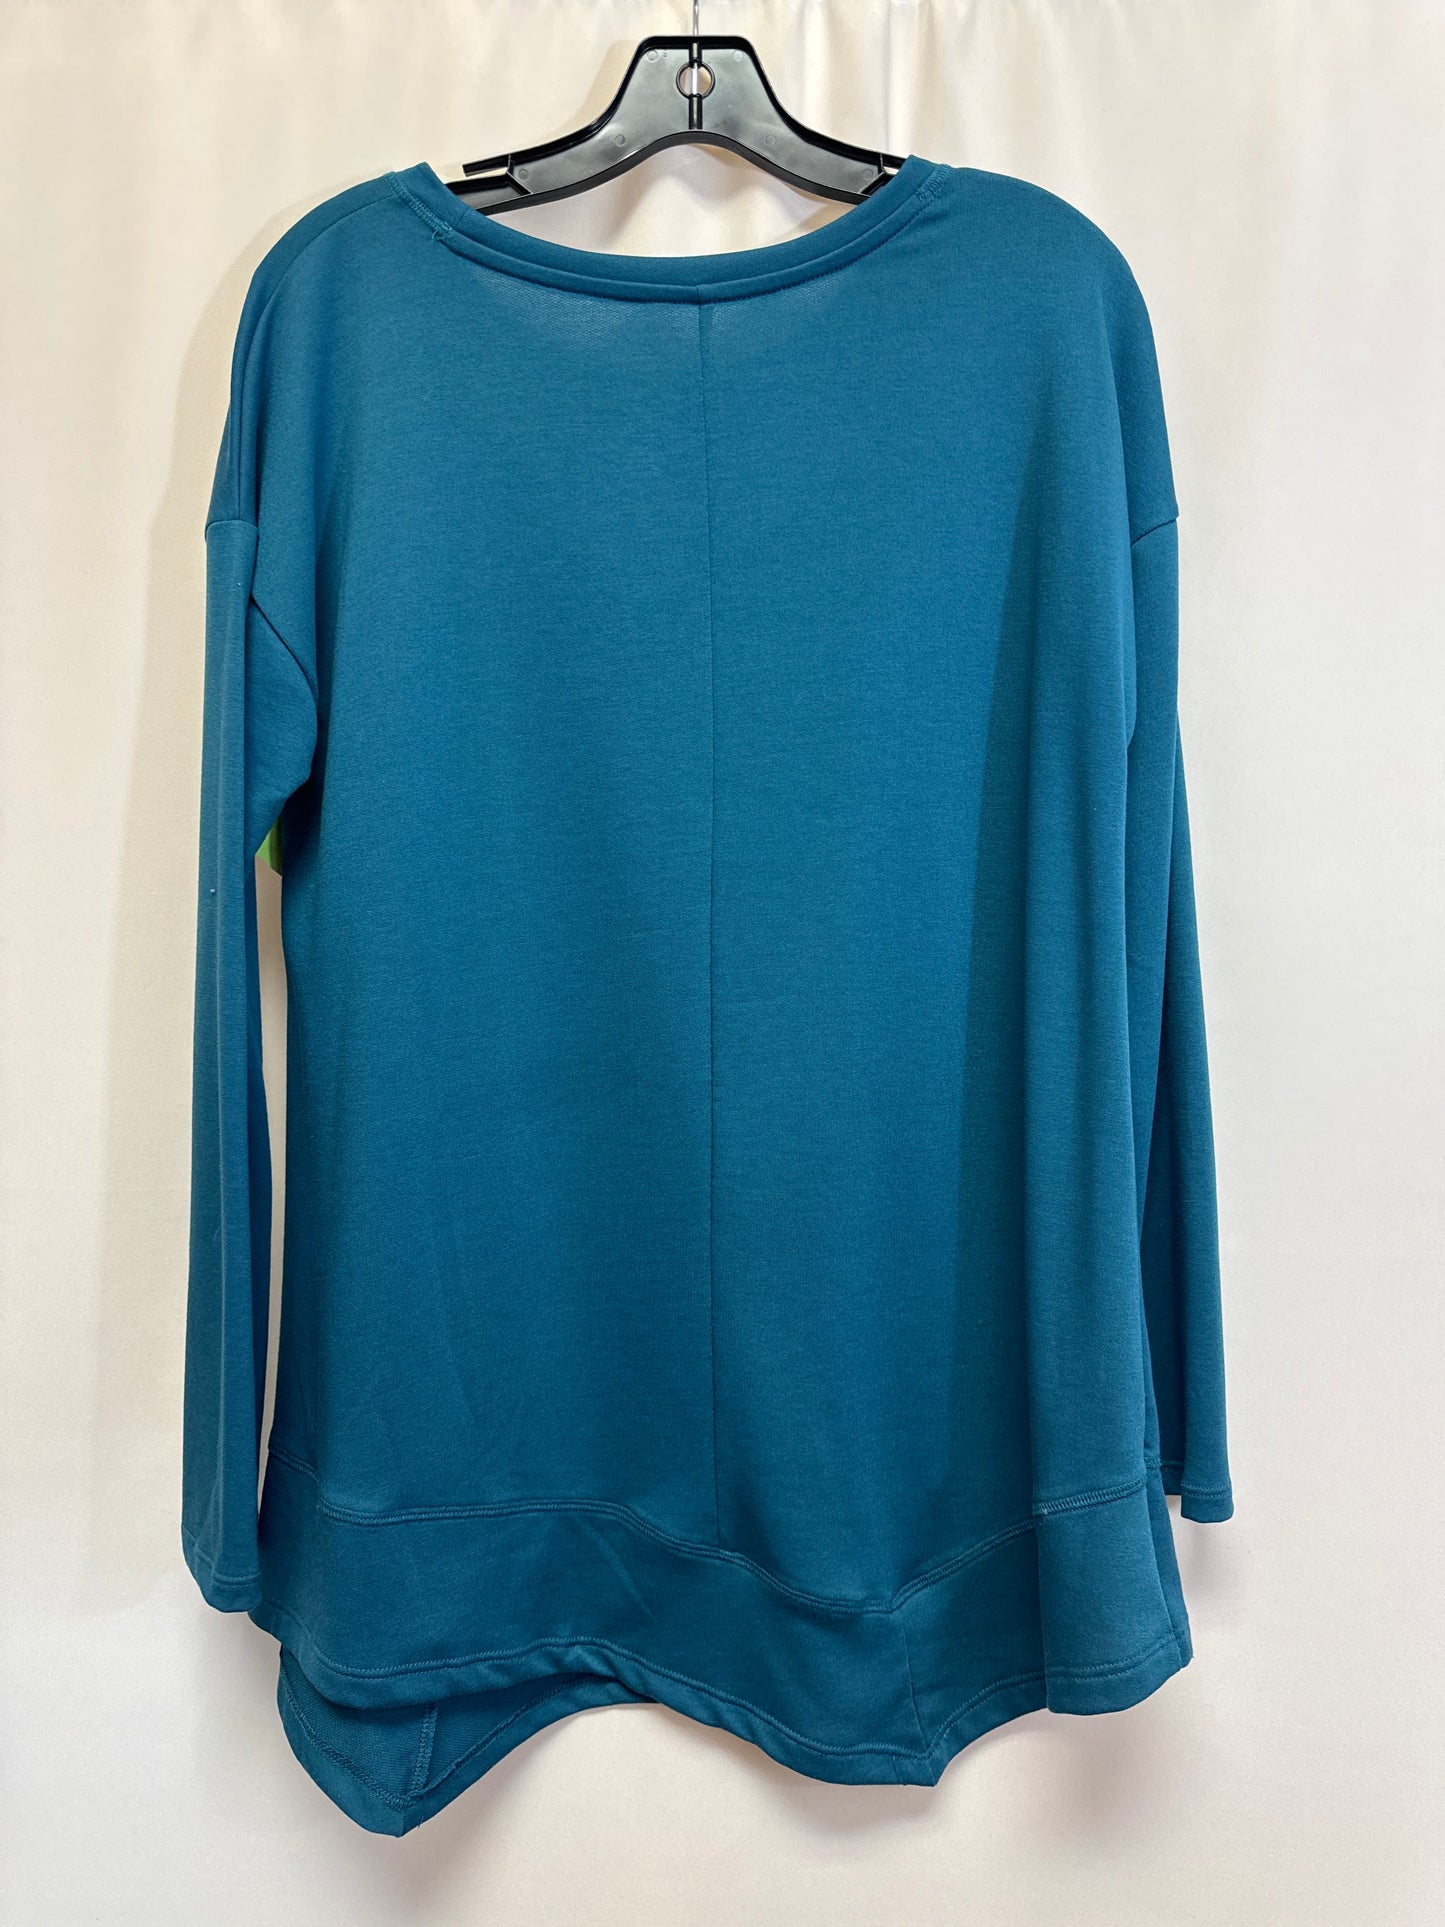 Top Long Sleeve By St Johns Bay  Size: M